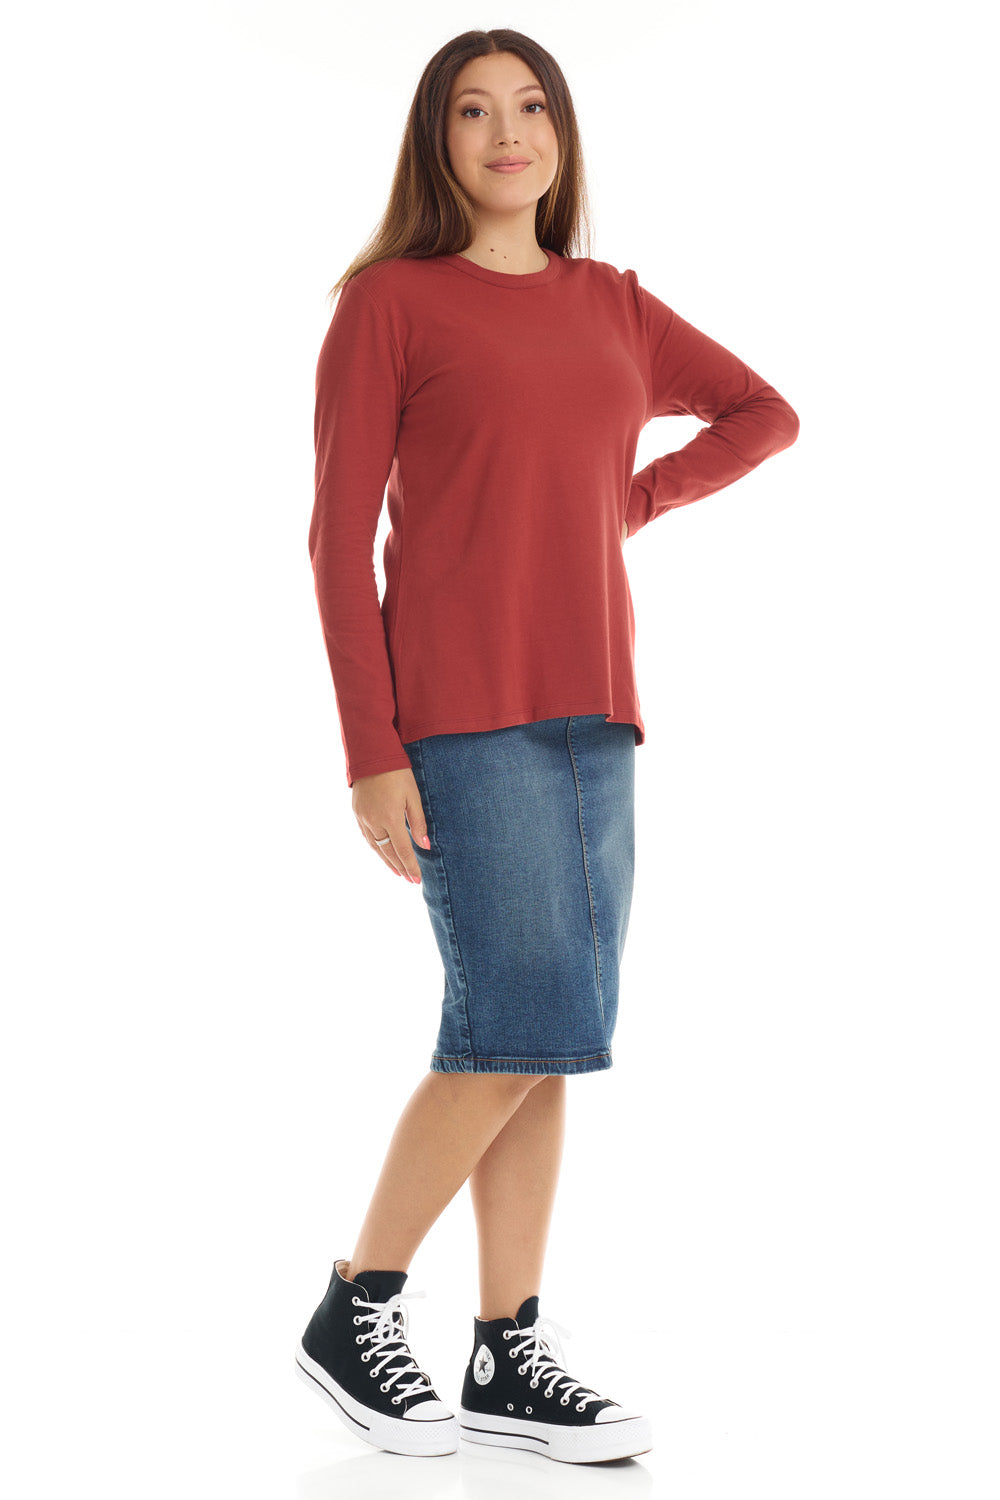 rust color cotton long sleeve top for women